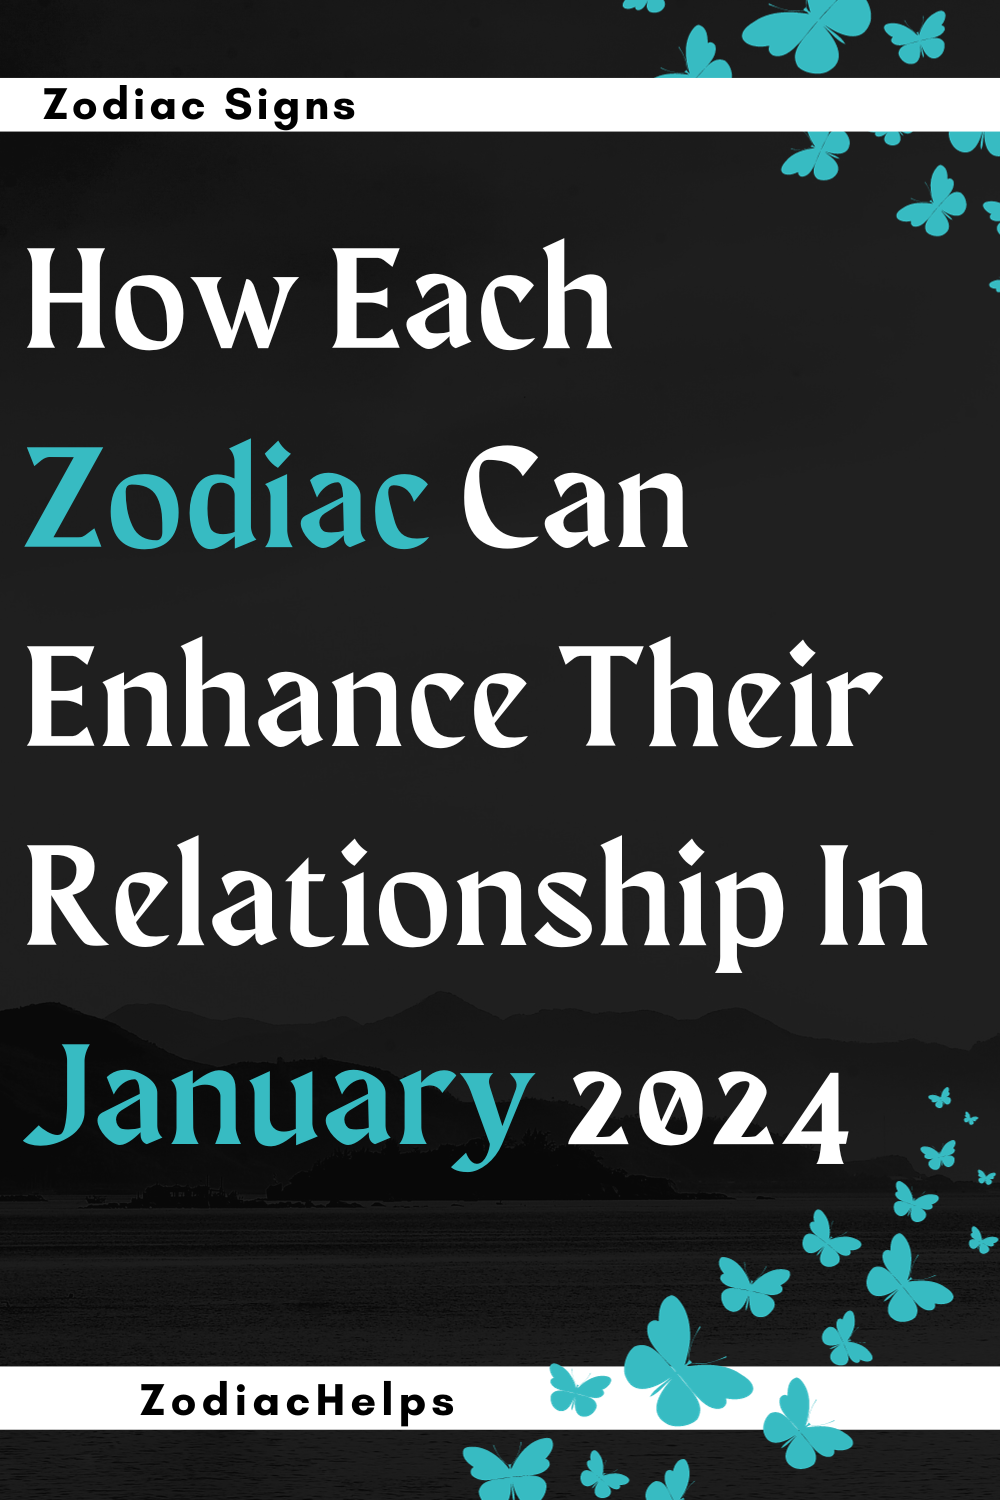 How Each Zodiac Can Enhance Their Relationship In January 2024